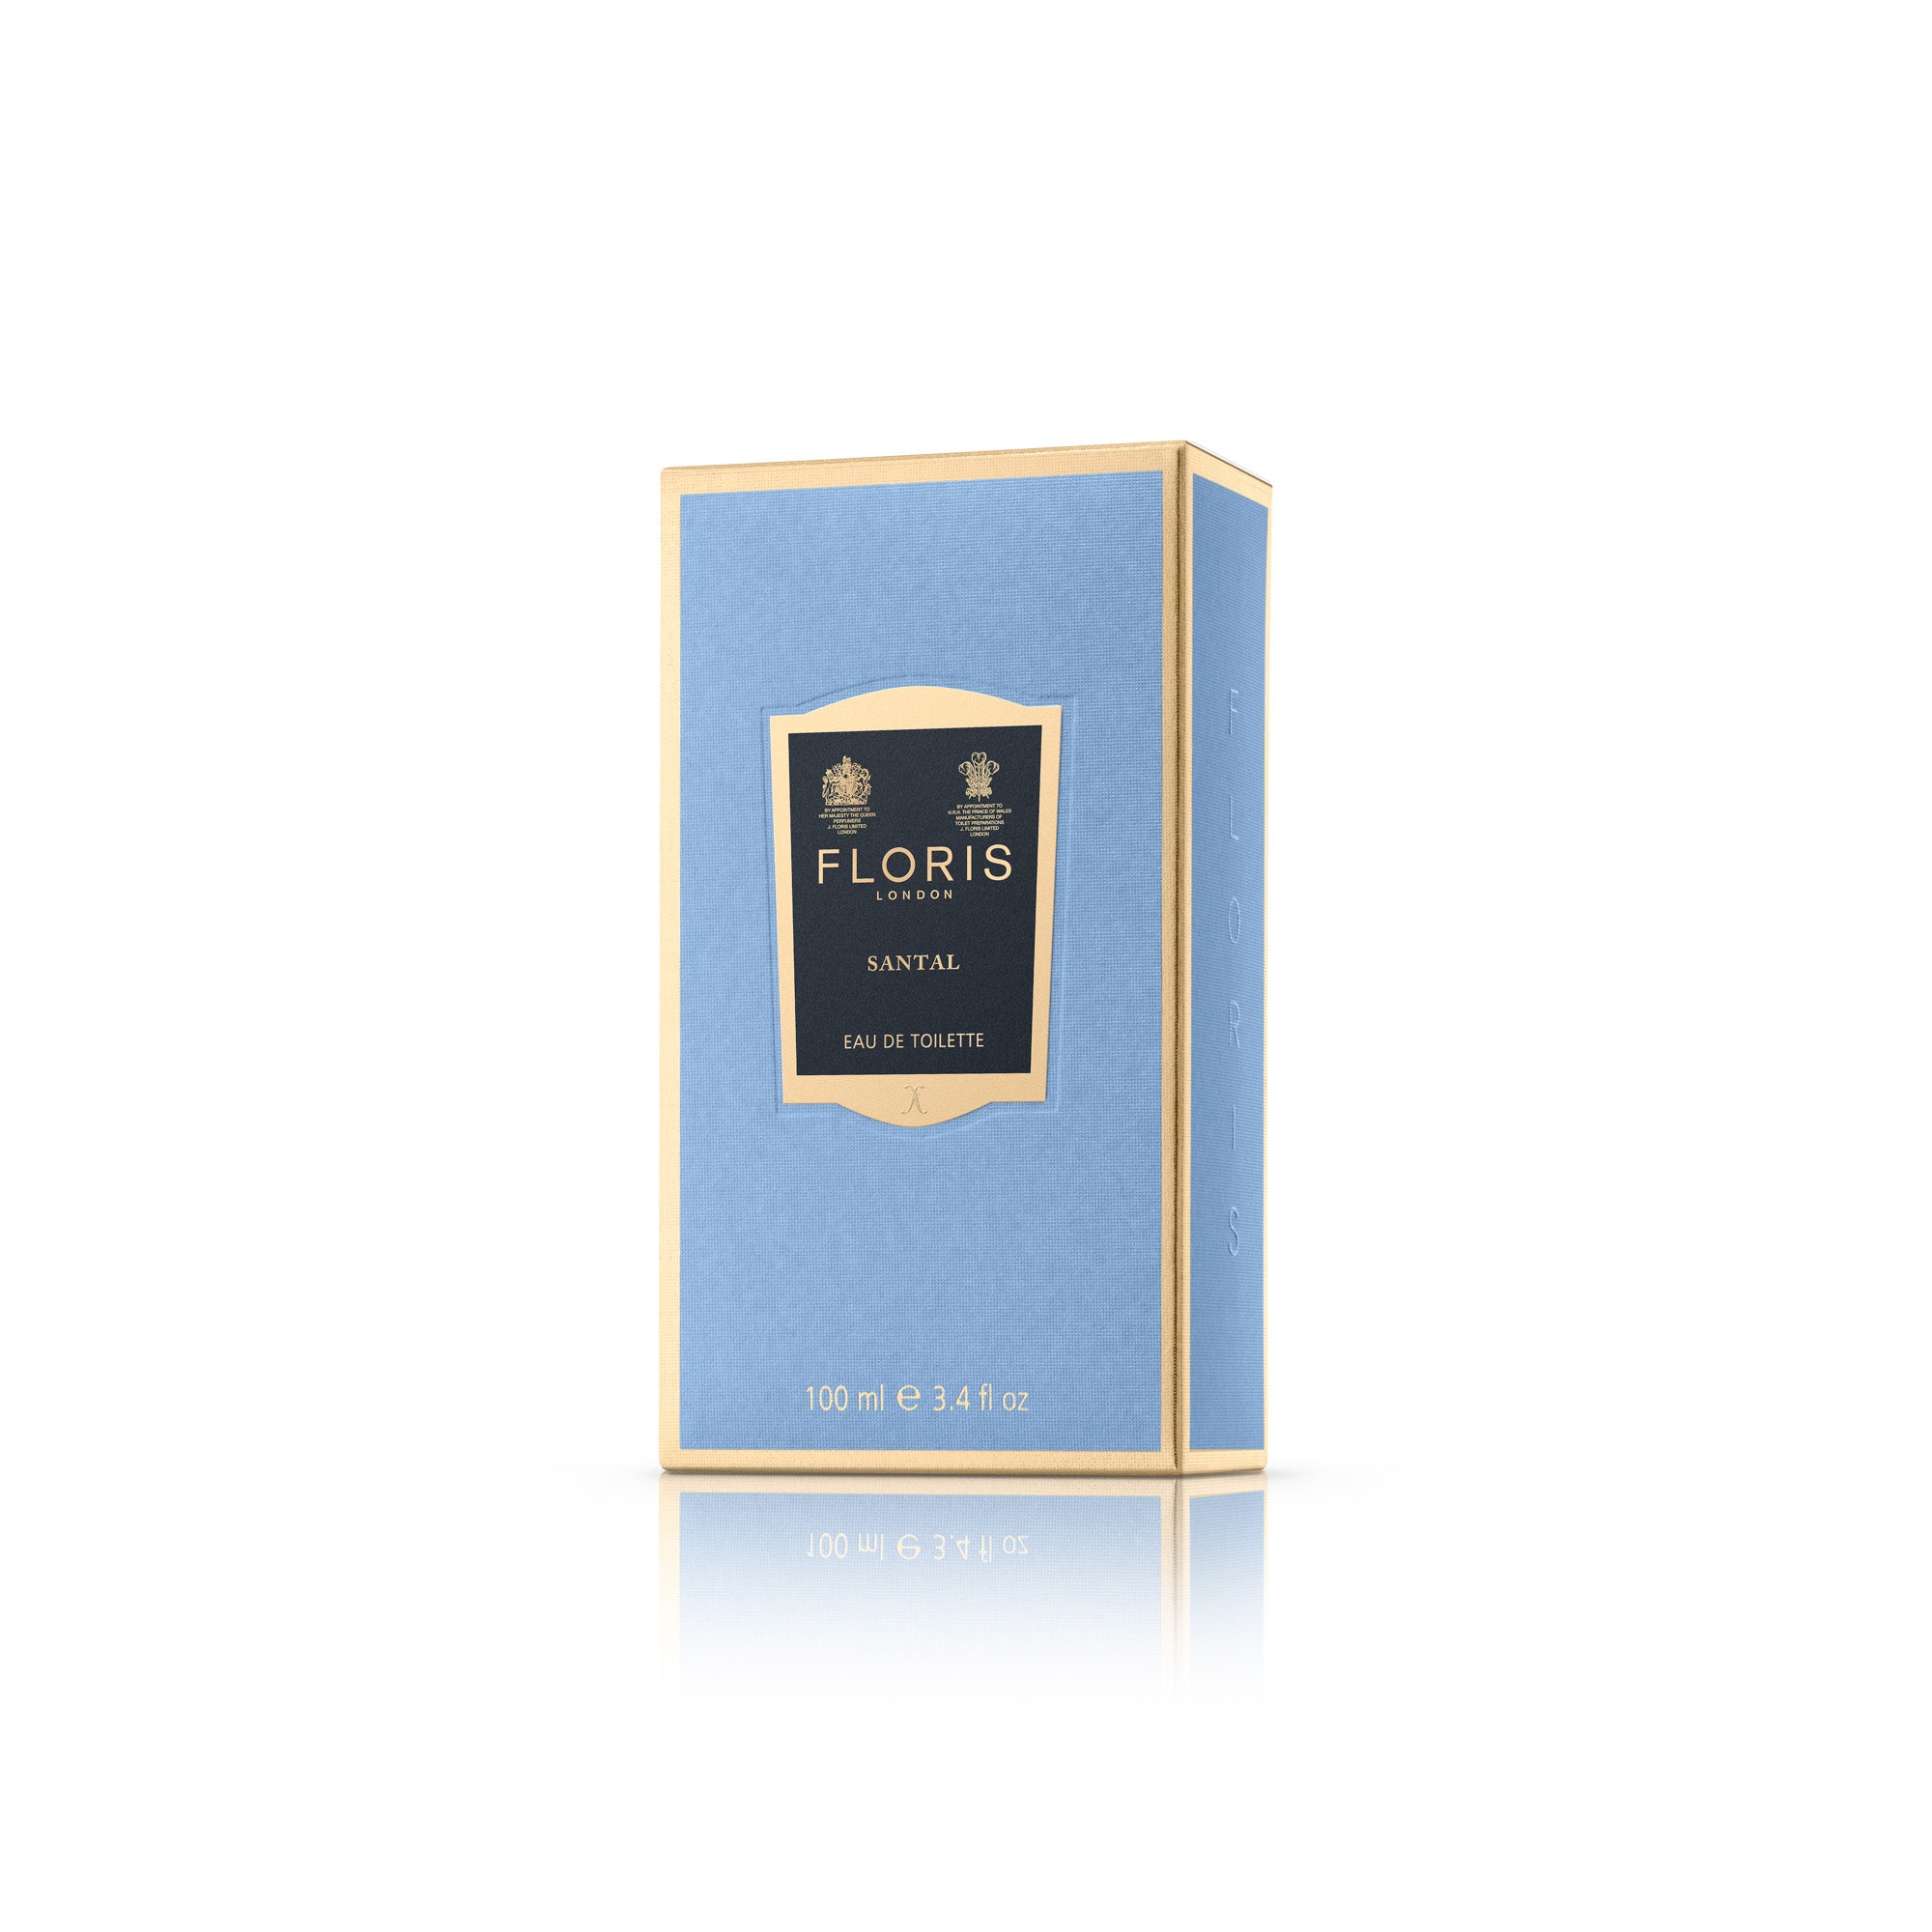 A blue box with a gold label on it containing FLORIS Santal 100 ML fragrance notes, by KirbyAllison.com.